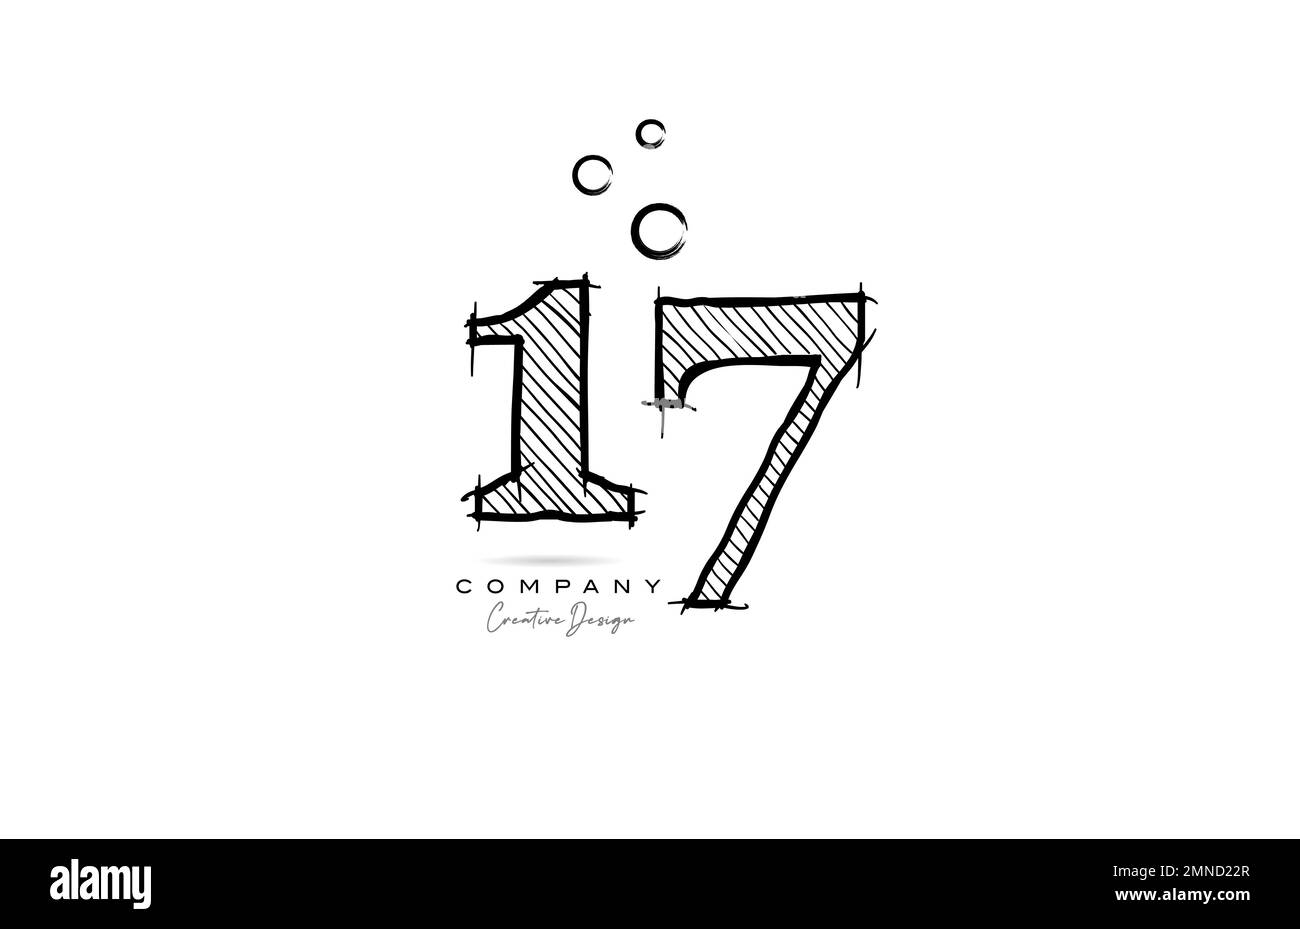 hand drawing number 17 logo icon design for company template or business. Creative logotype in pencil style Stock Vector